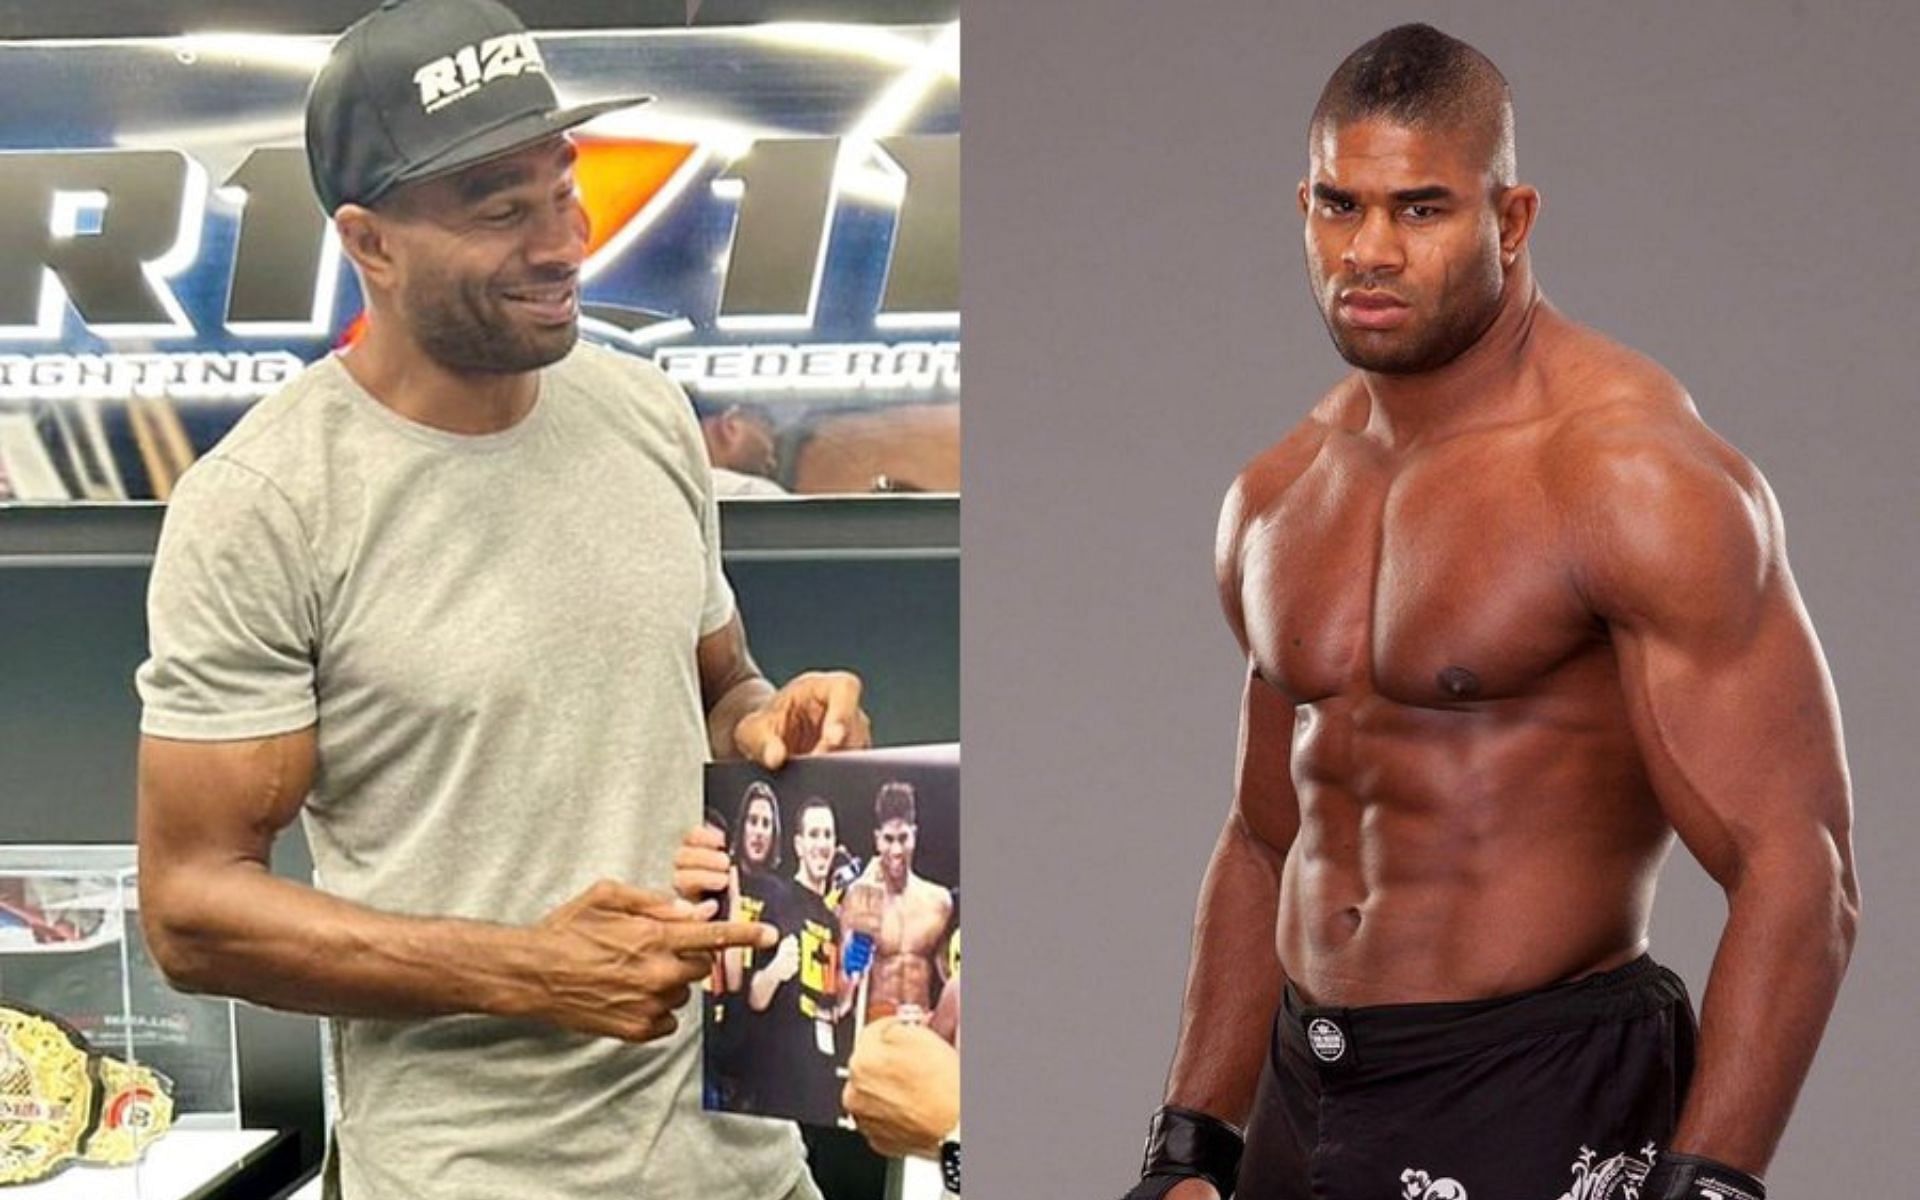 Alistair Overeem after losing weight (left) and Alistair Overeem when he was in the UFC (right) (Image credits @lefthookclub on Twitter)